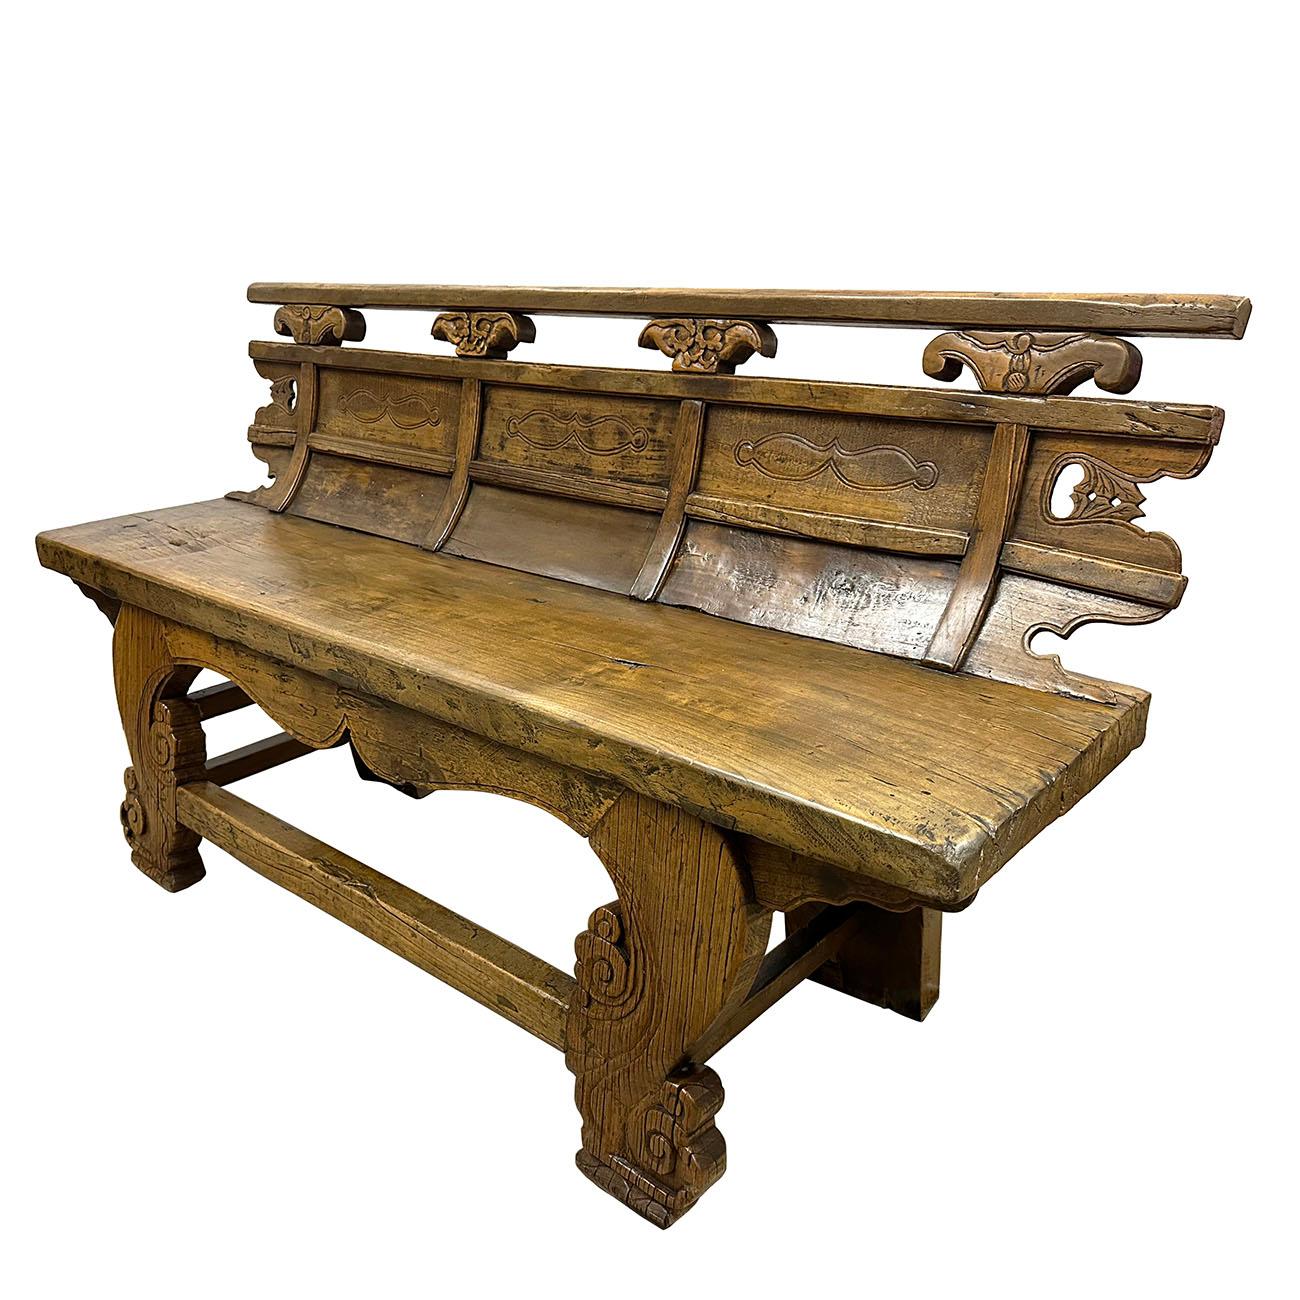 Look at this gorgeous Chinese Antique Massive Carved Country Style Love-seat. It has about 150 years history and still has its original condition, very smooth to touch, full of patina. It was made in Shan Xi, China with solid elm wood. Very solid,